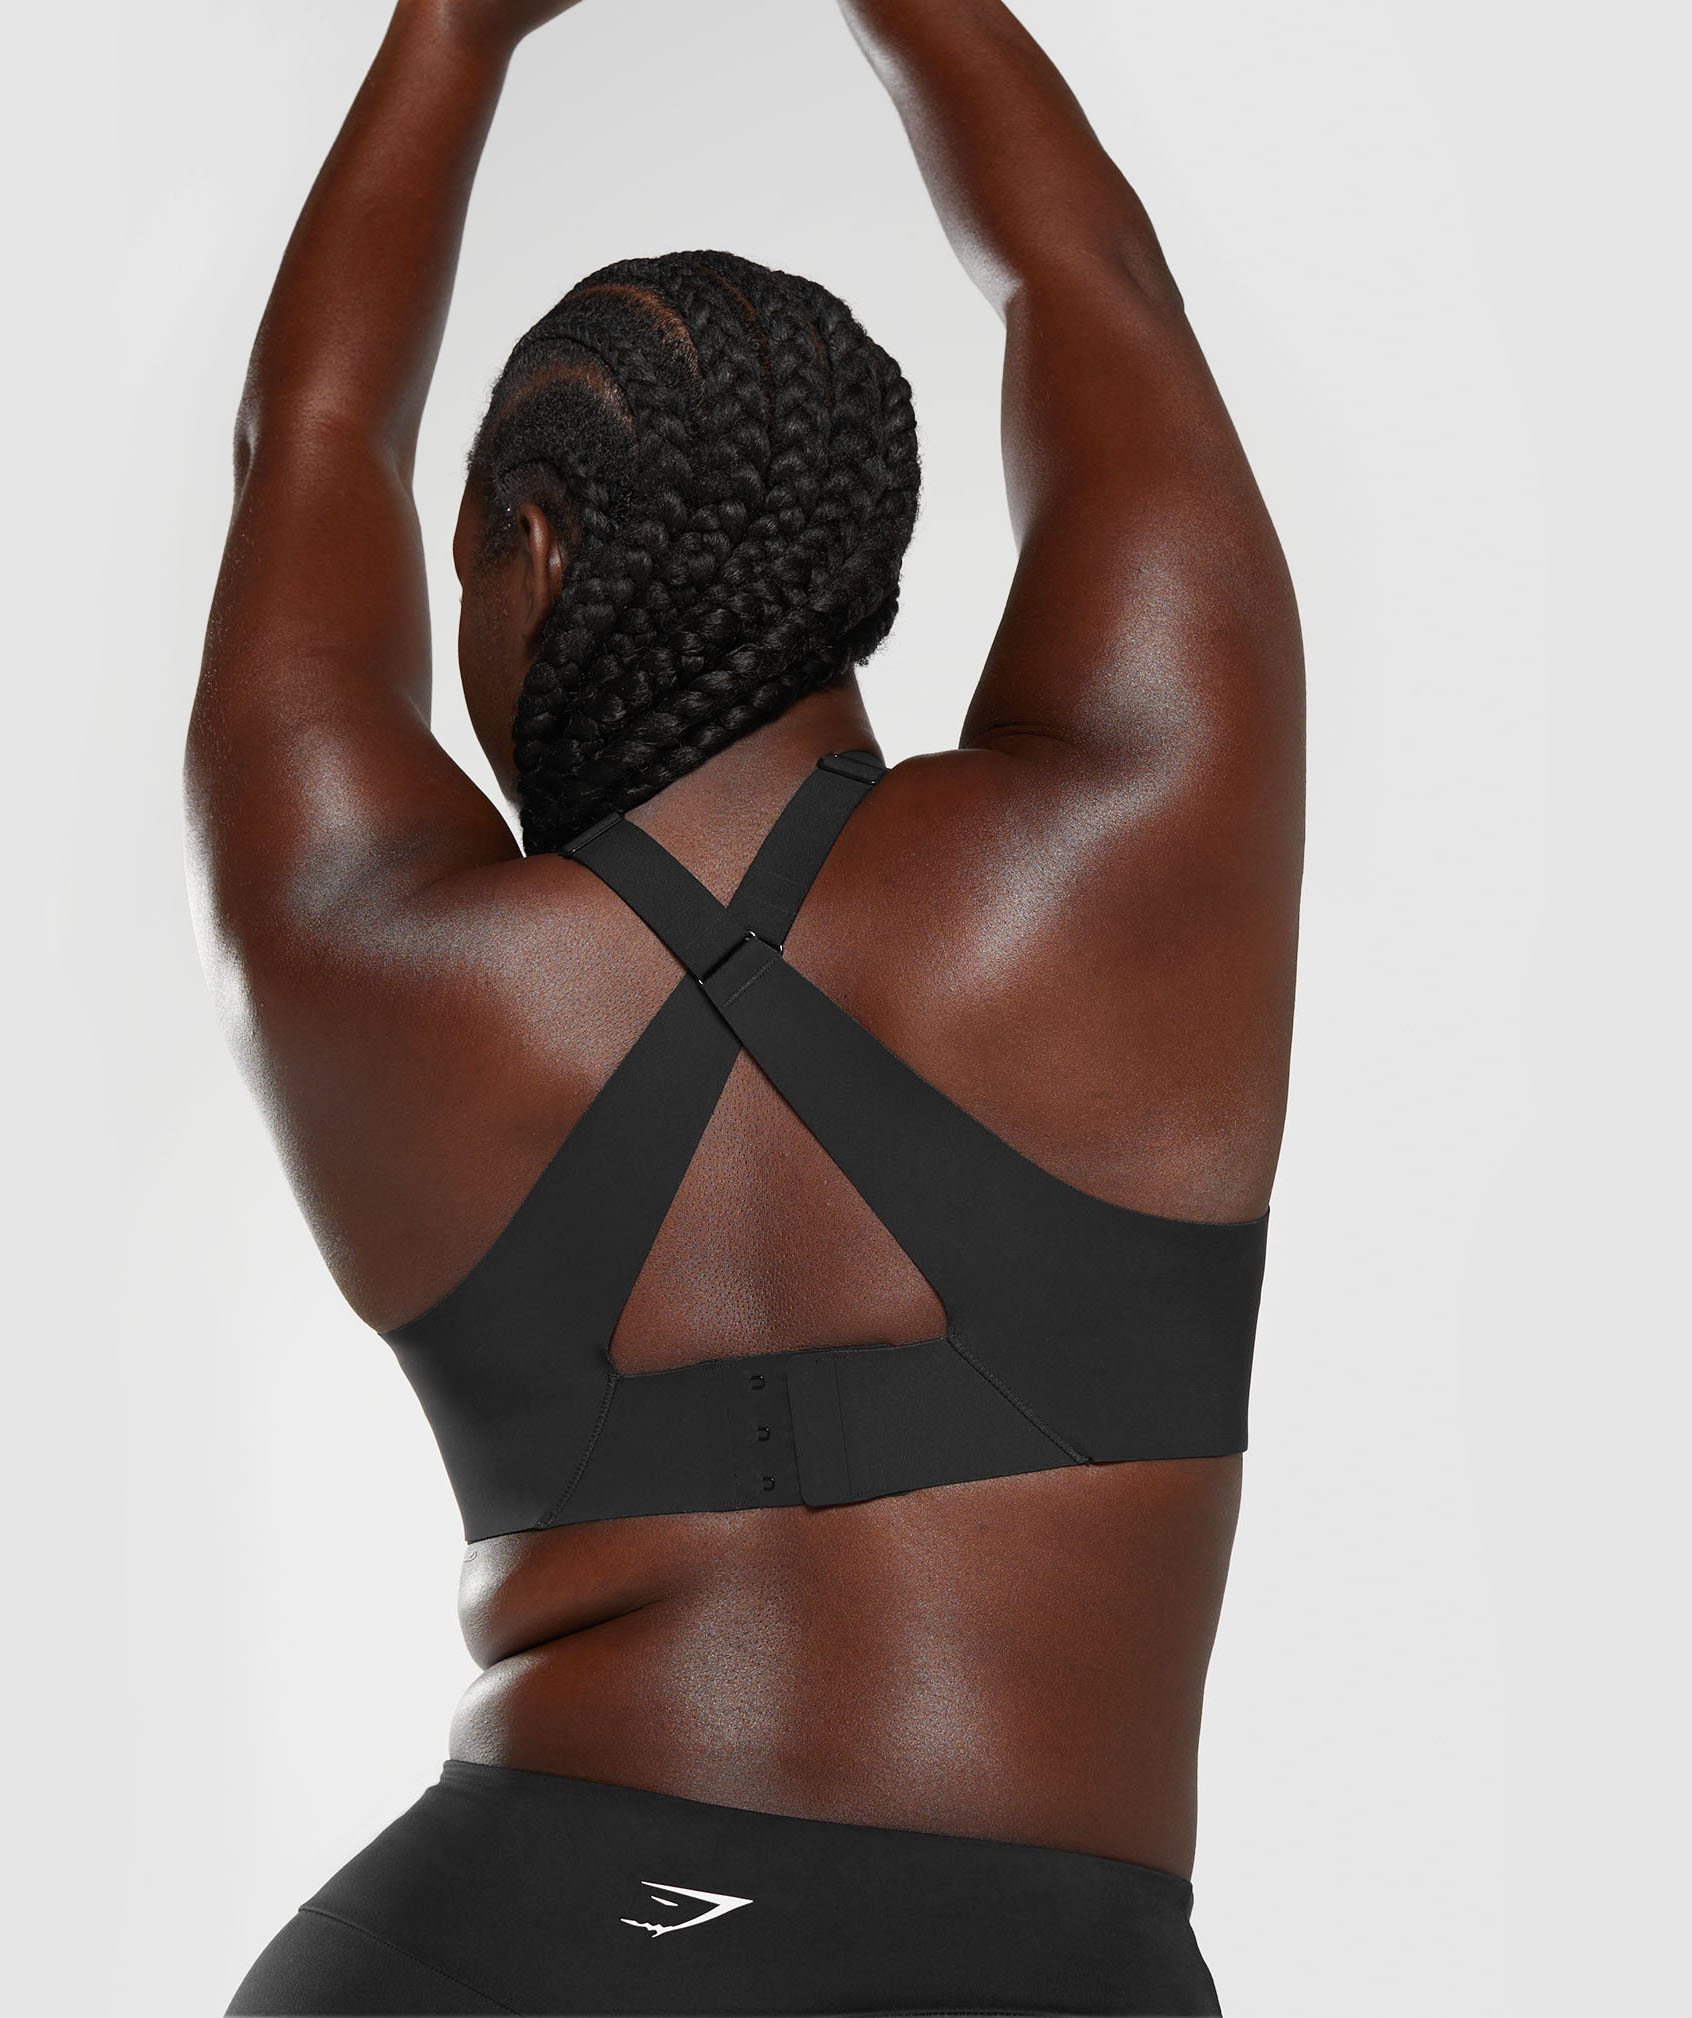 Perfect sports bra for any kind of activity  You are fully supported when  you need to minimize bounce - Shapeez Canada